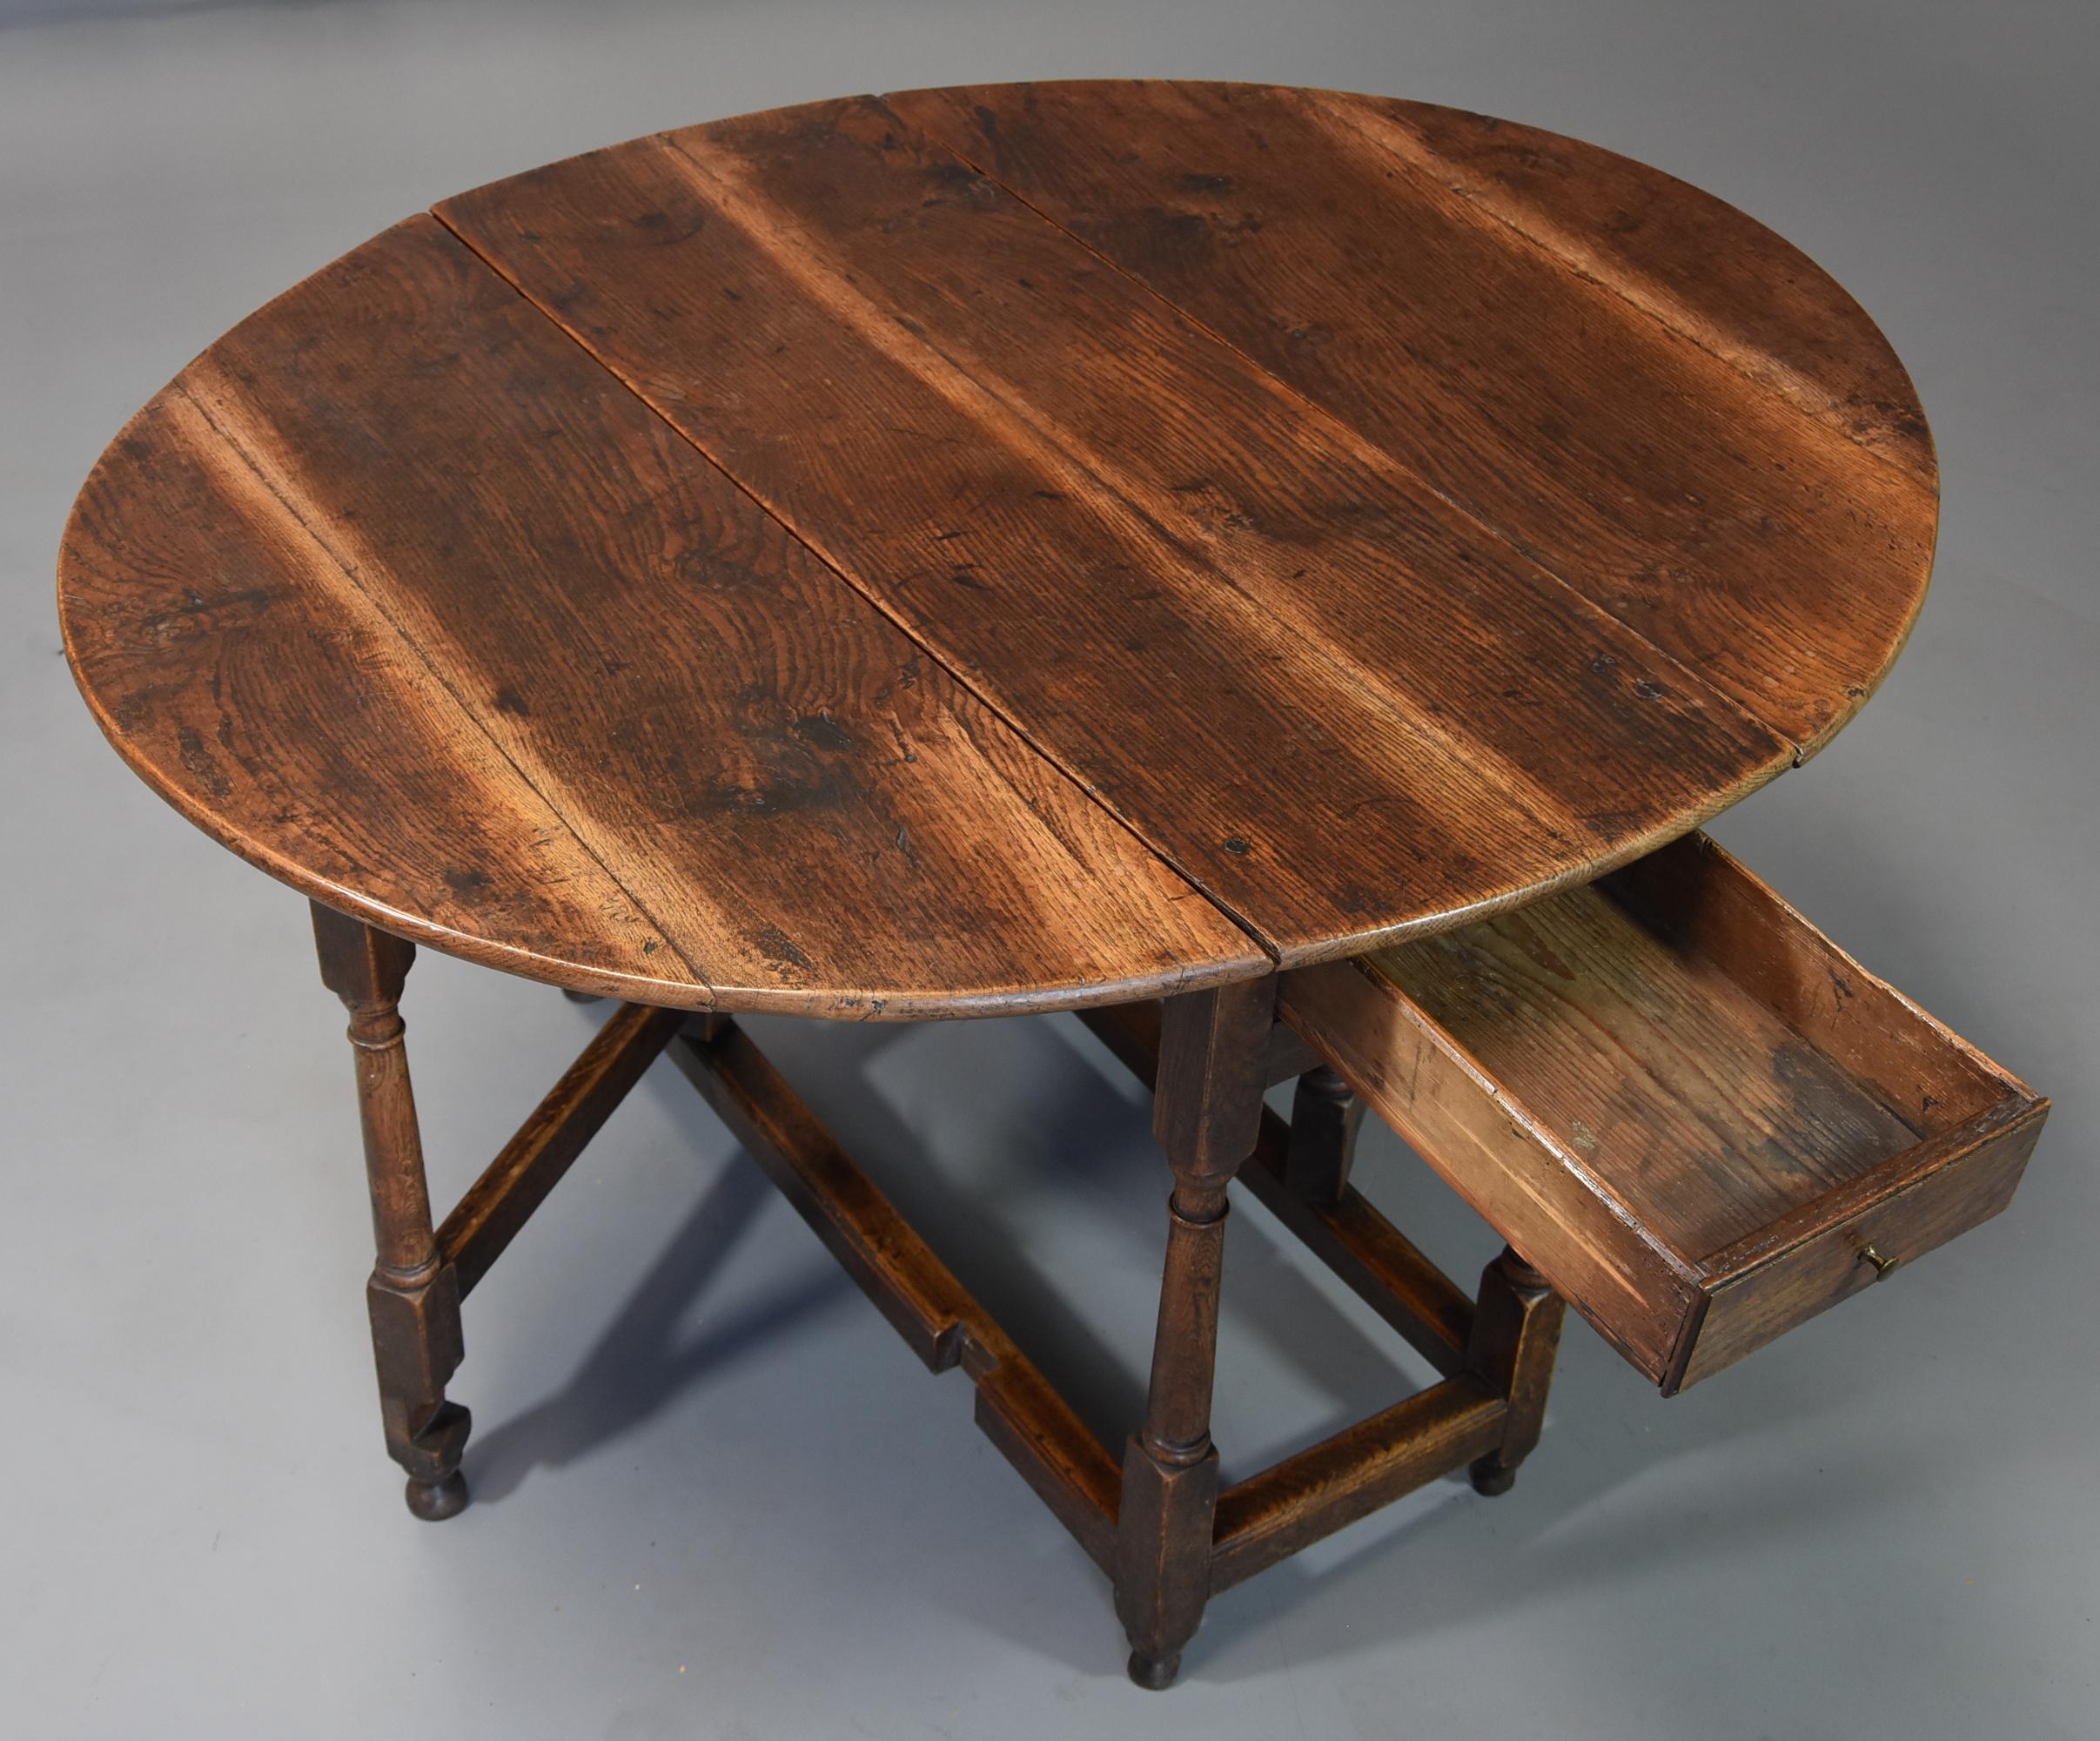 English Early 18th Century Oak Gateleg Table with Superb Original Patina For Sale 4